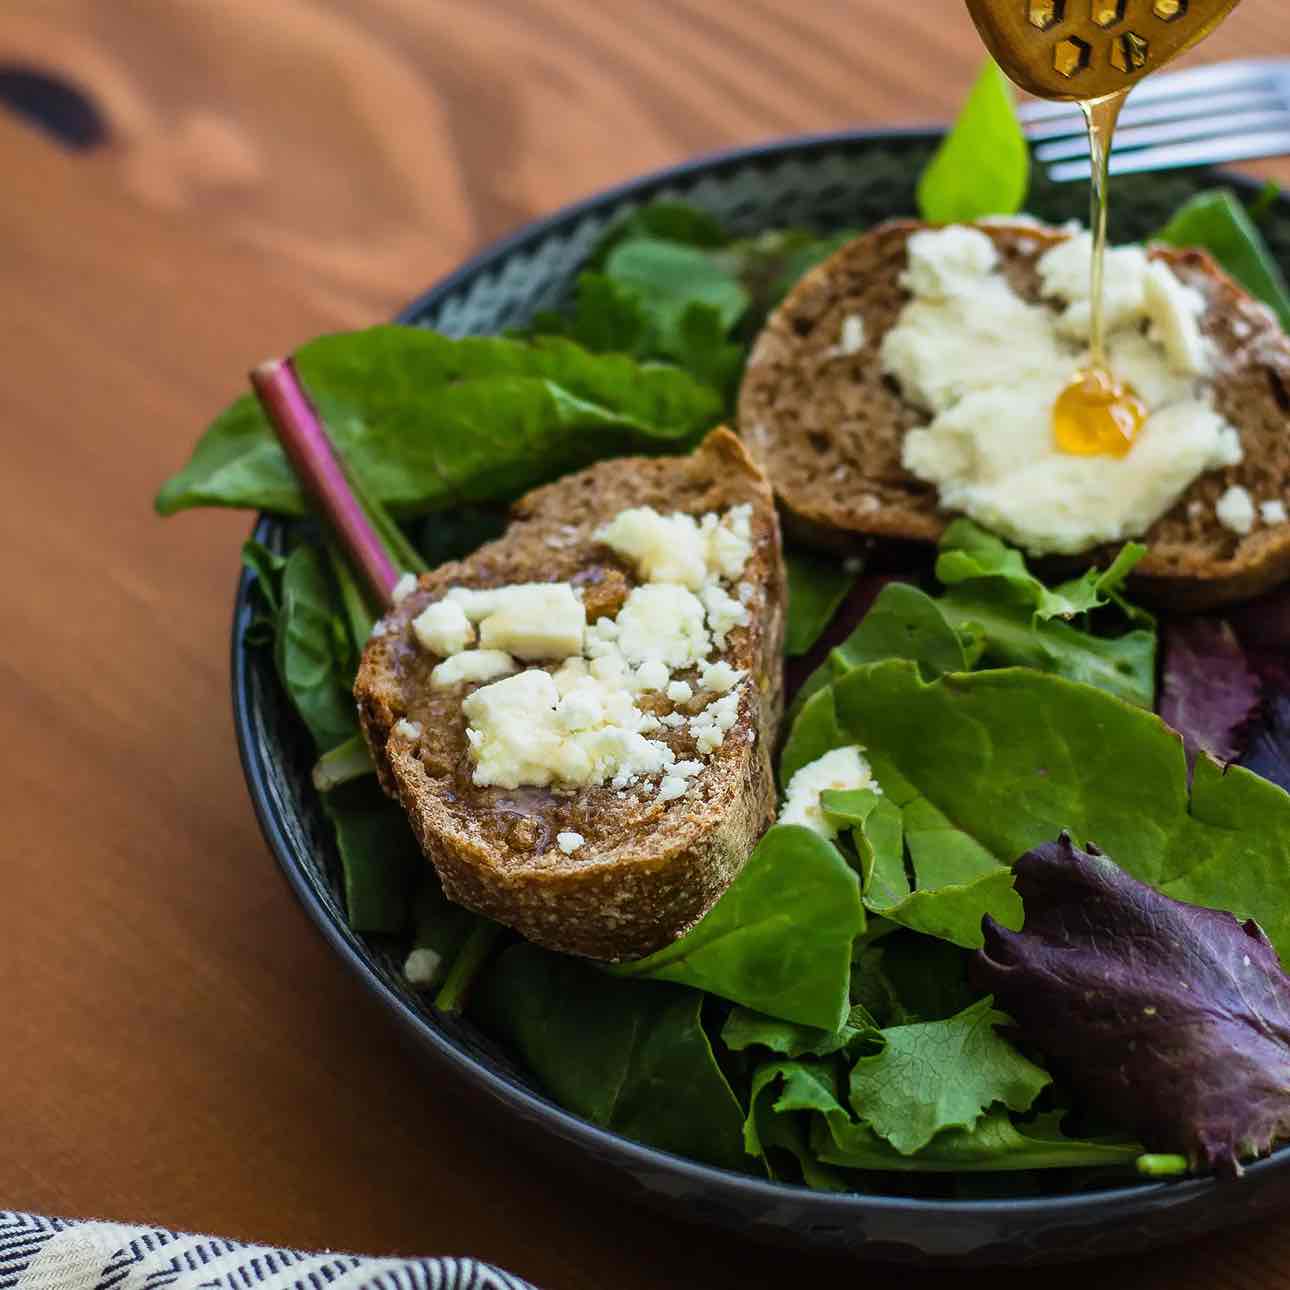 wholewheat loaf and goat cheese salad